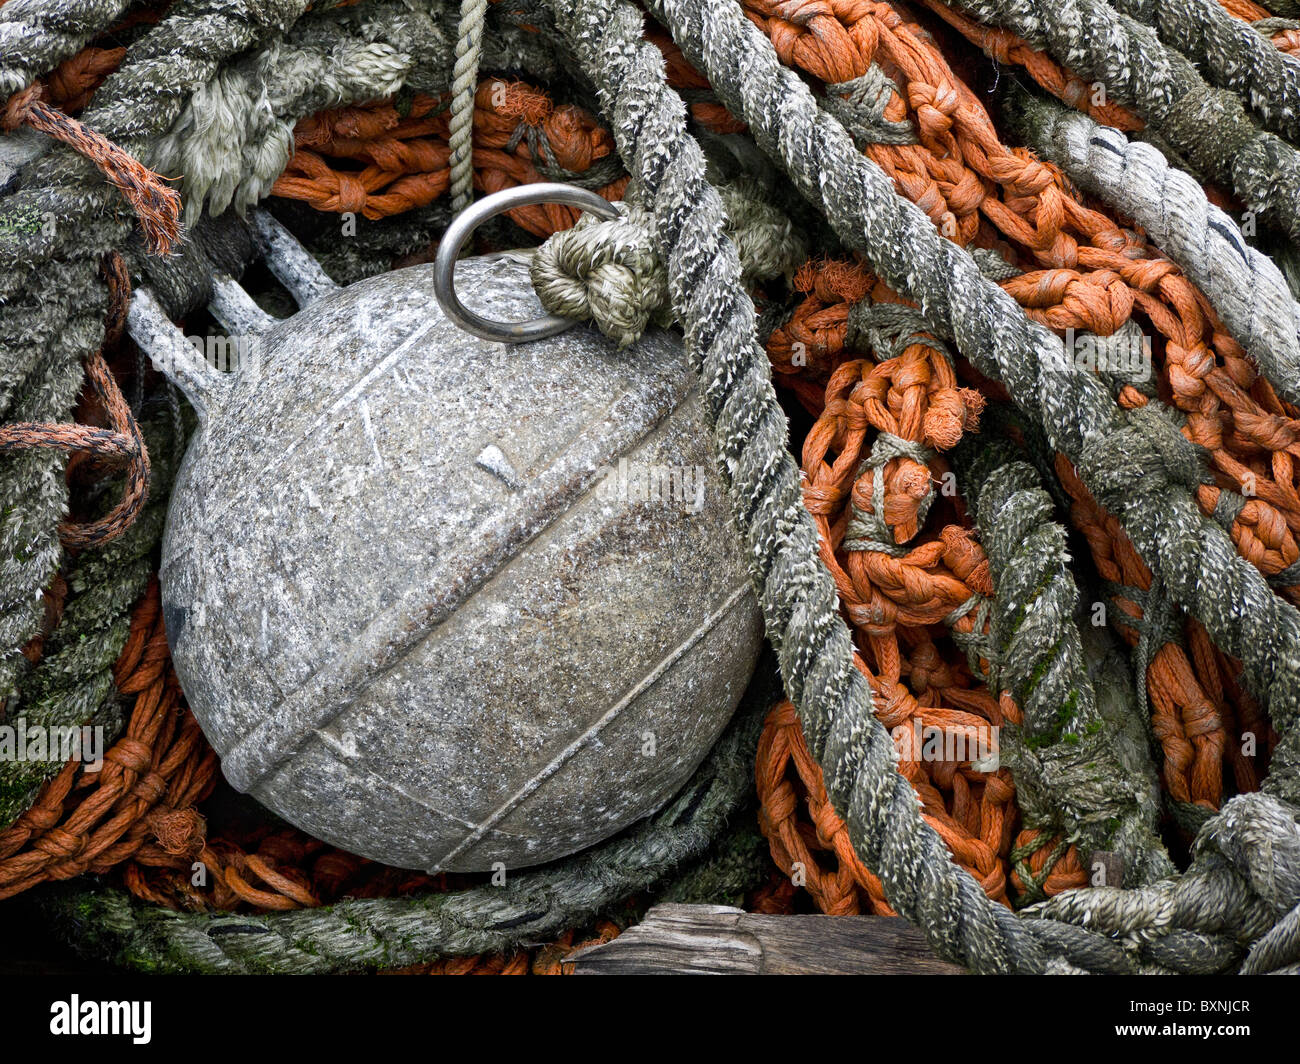 Piles of fishing nets and buoys. Stock Photo